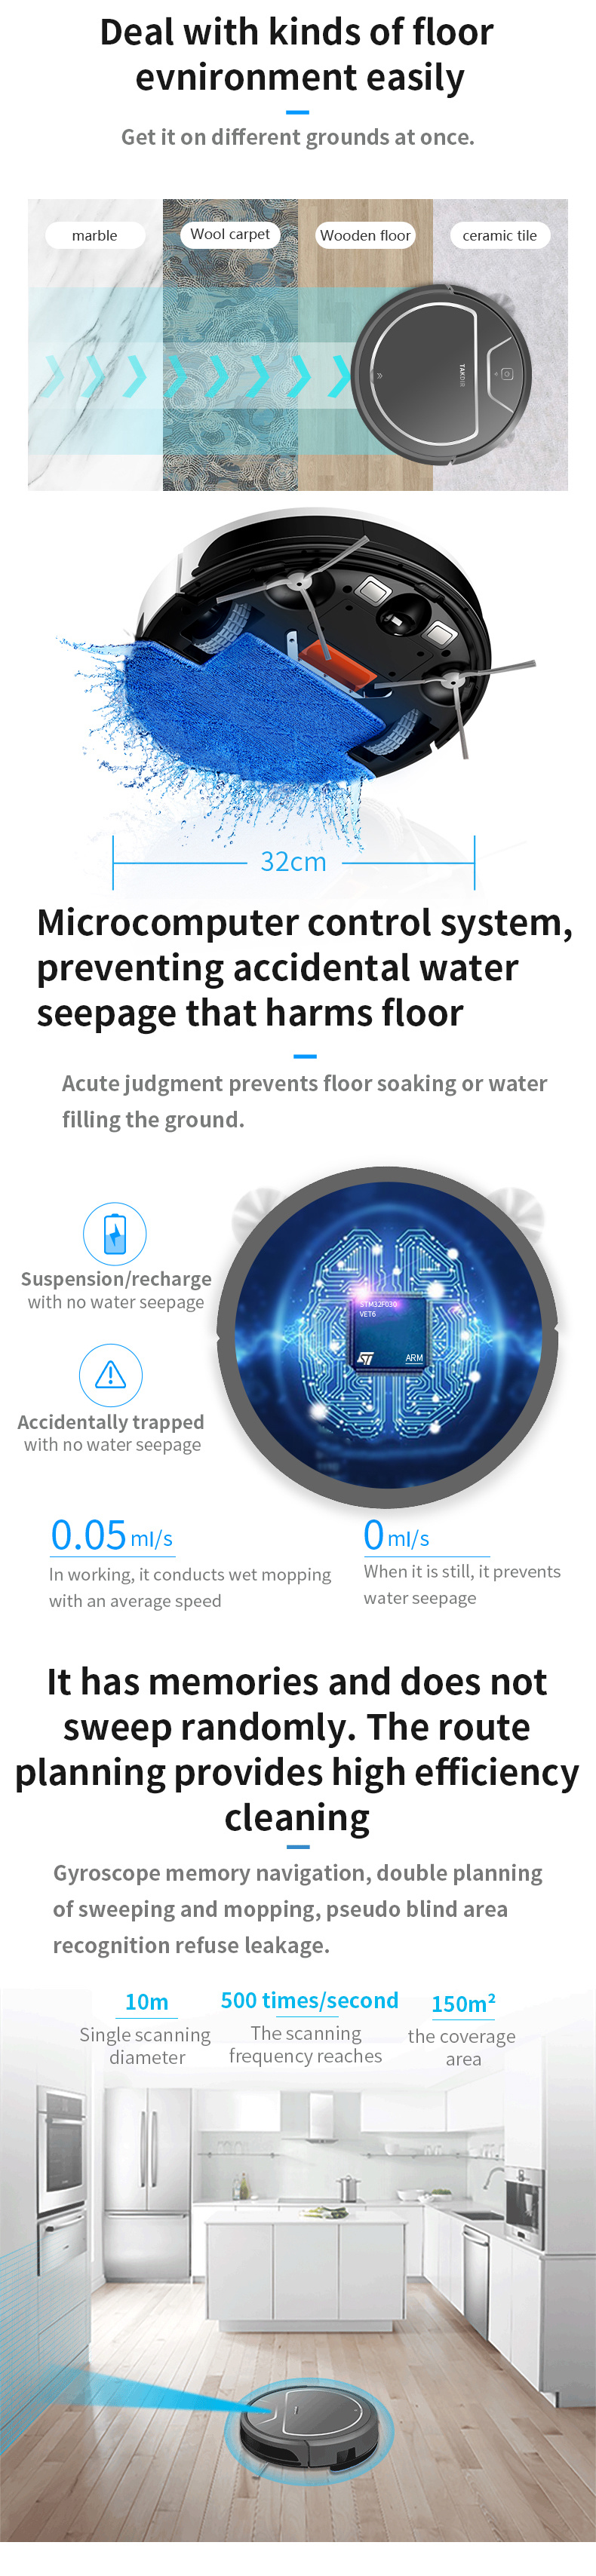 Cordless Carpet Cleaner and Robotic Vacuum Cleaner Have 2000PA Suction Power, Can Work on Short-Haired Carpet and Long-Haired Carpet